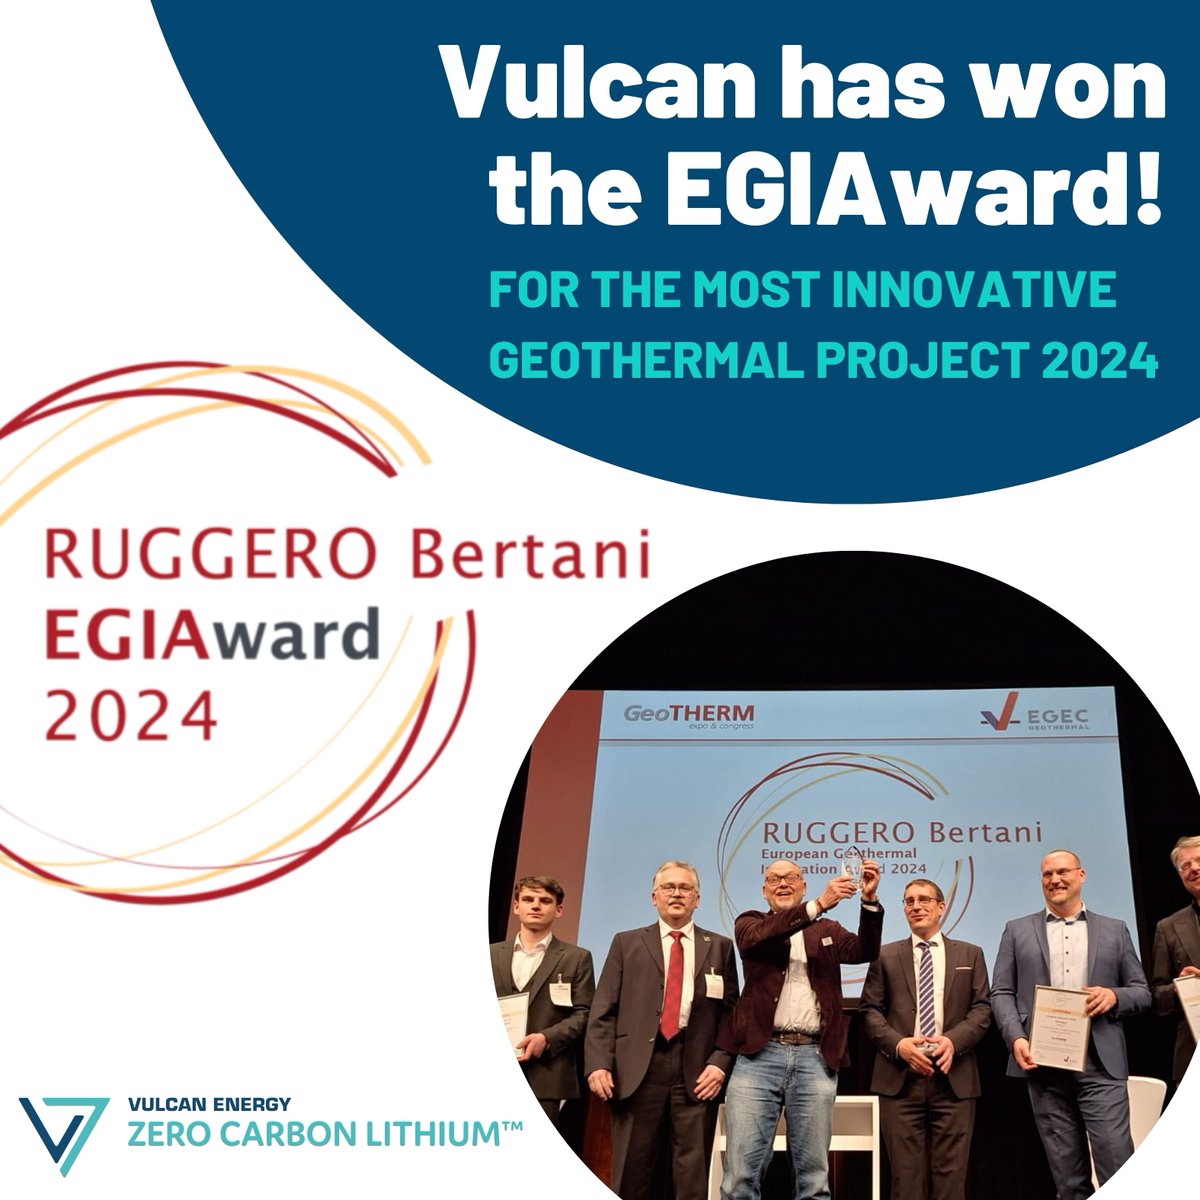 We are delighted to announce that we have won the 'Ruggero Bertani European Geothermal Innovation Award 2024' today for the most innovative geothermal project 2024! $VUL:AX #Delivering #ExecutionReady #ZEROCARBON #LITHIUM™ #Project #Energytransition #Mobilitytransition…